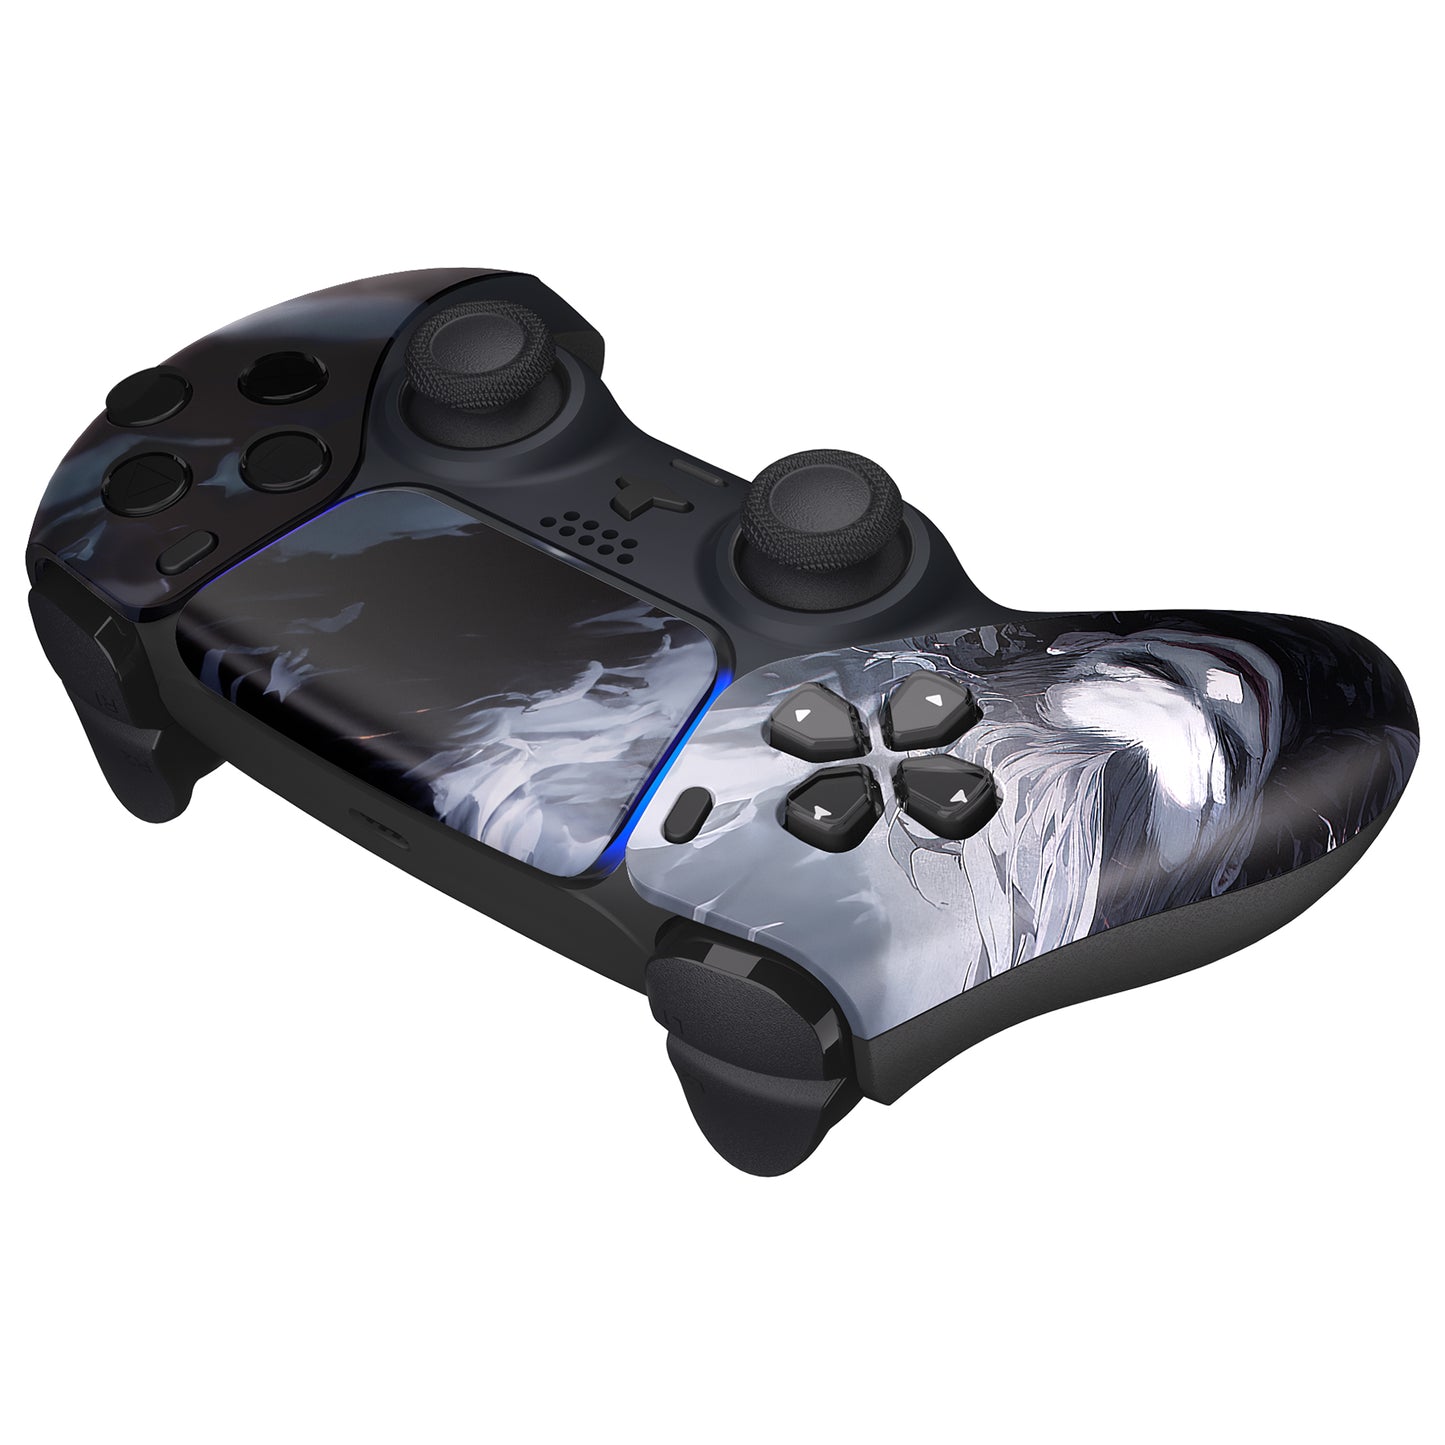 eXtremeRate Replacemen Front Housing Shell with Touchpad Compatible with PS5 Controller BDM-010/020/030/040 - The Dark Clown eXtremeRate